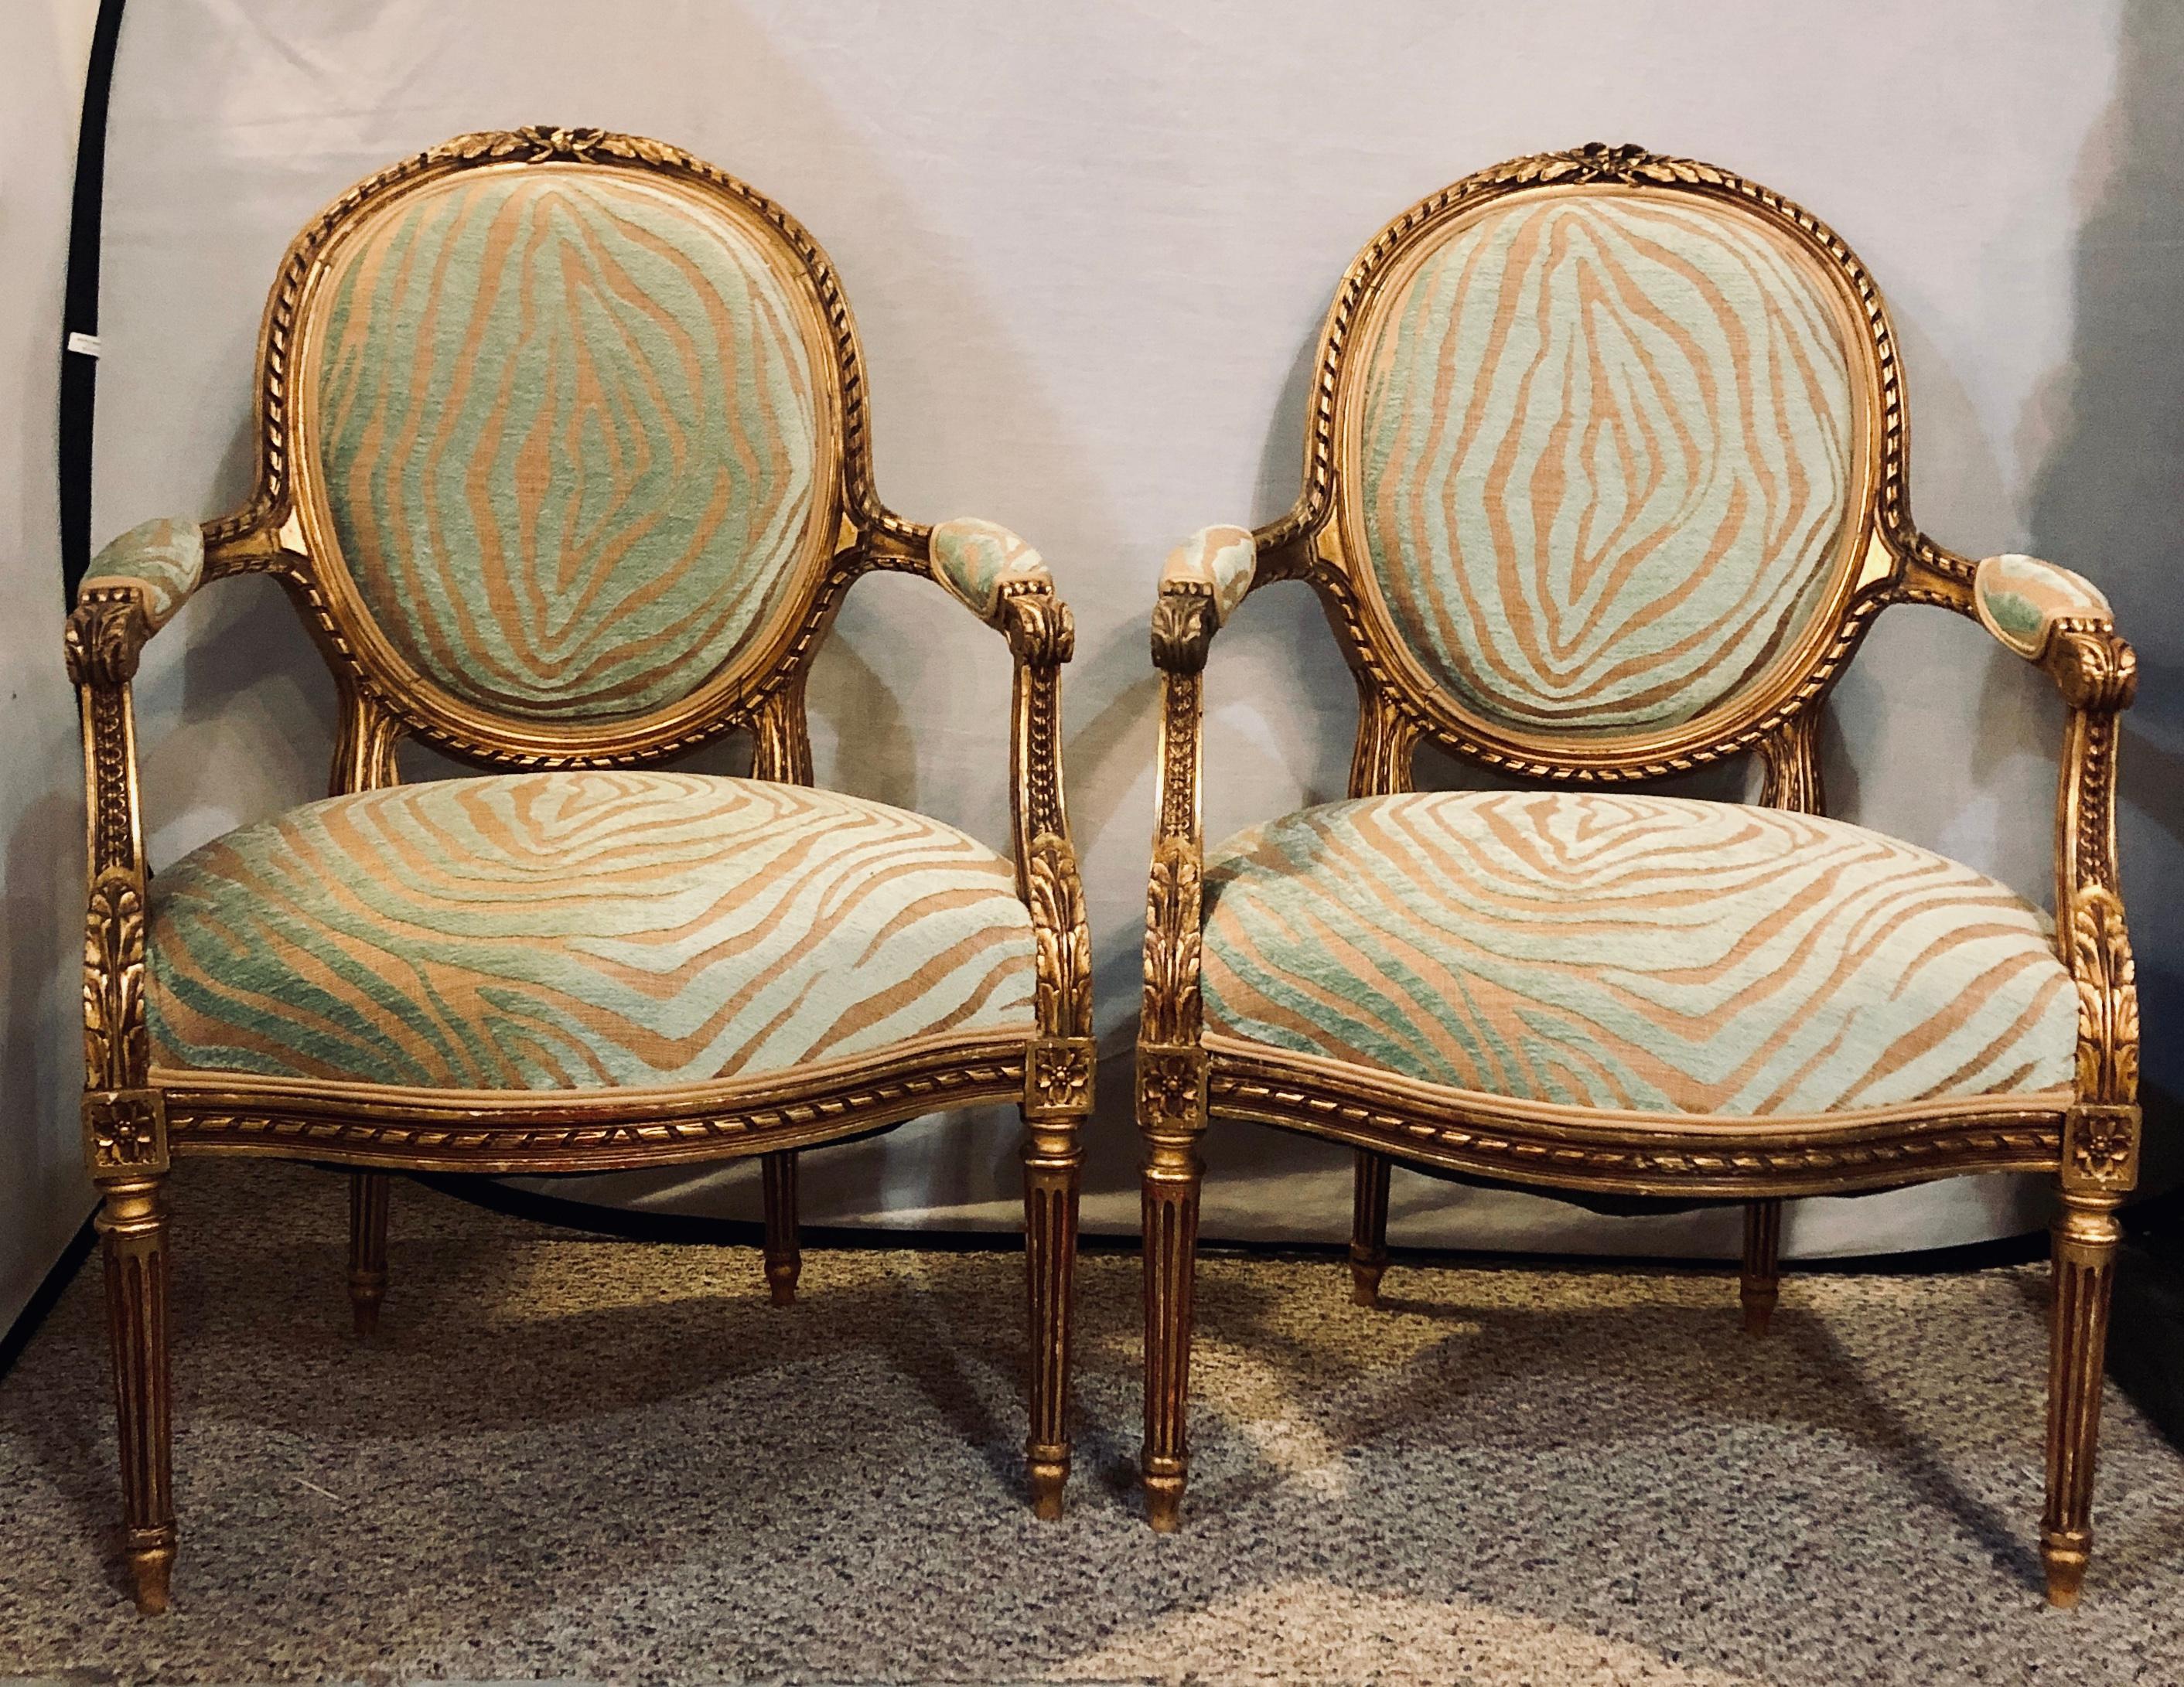 Pair of Louis XVI style green zebra striped fauteuils or armchairs in a wonderful gilt gold distressed finish.